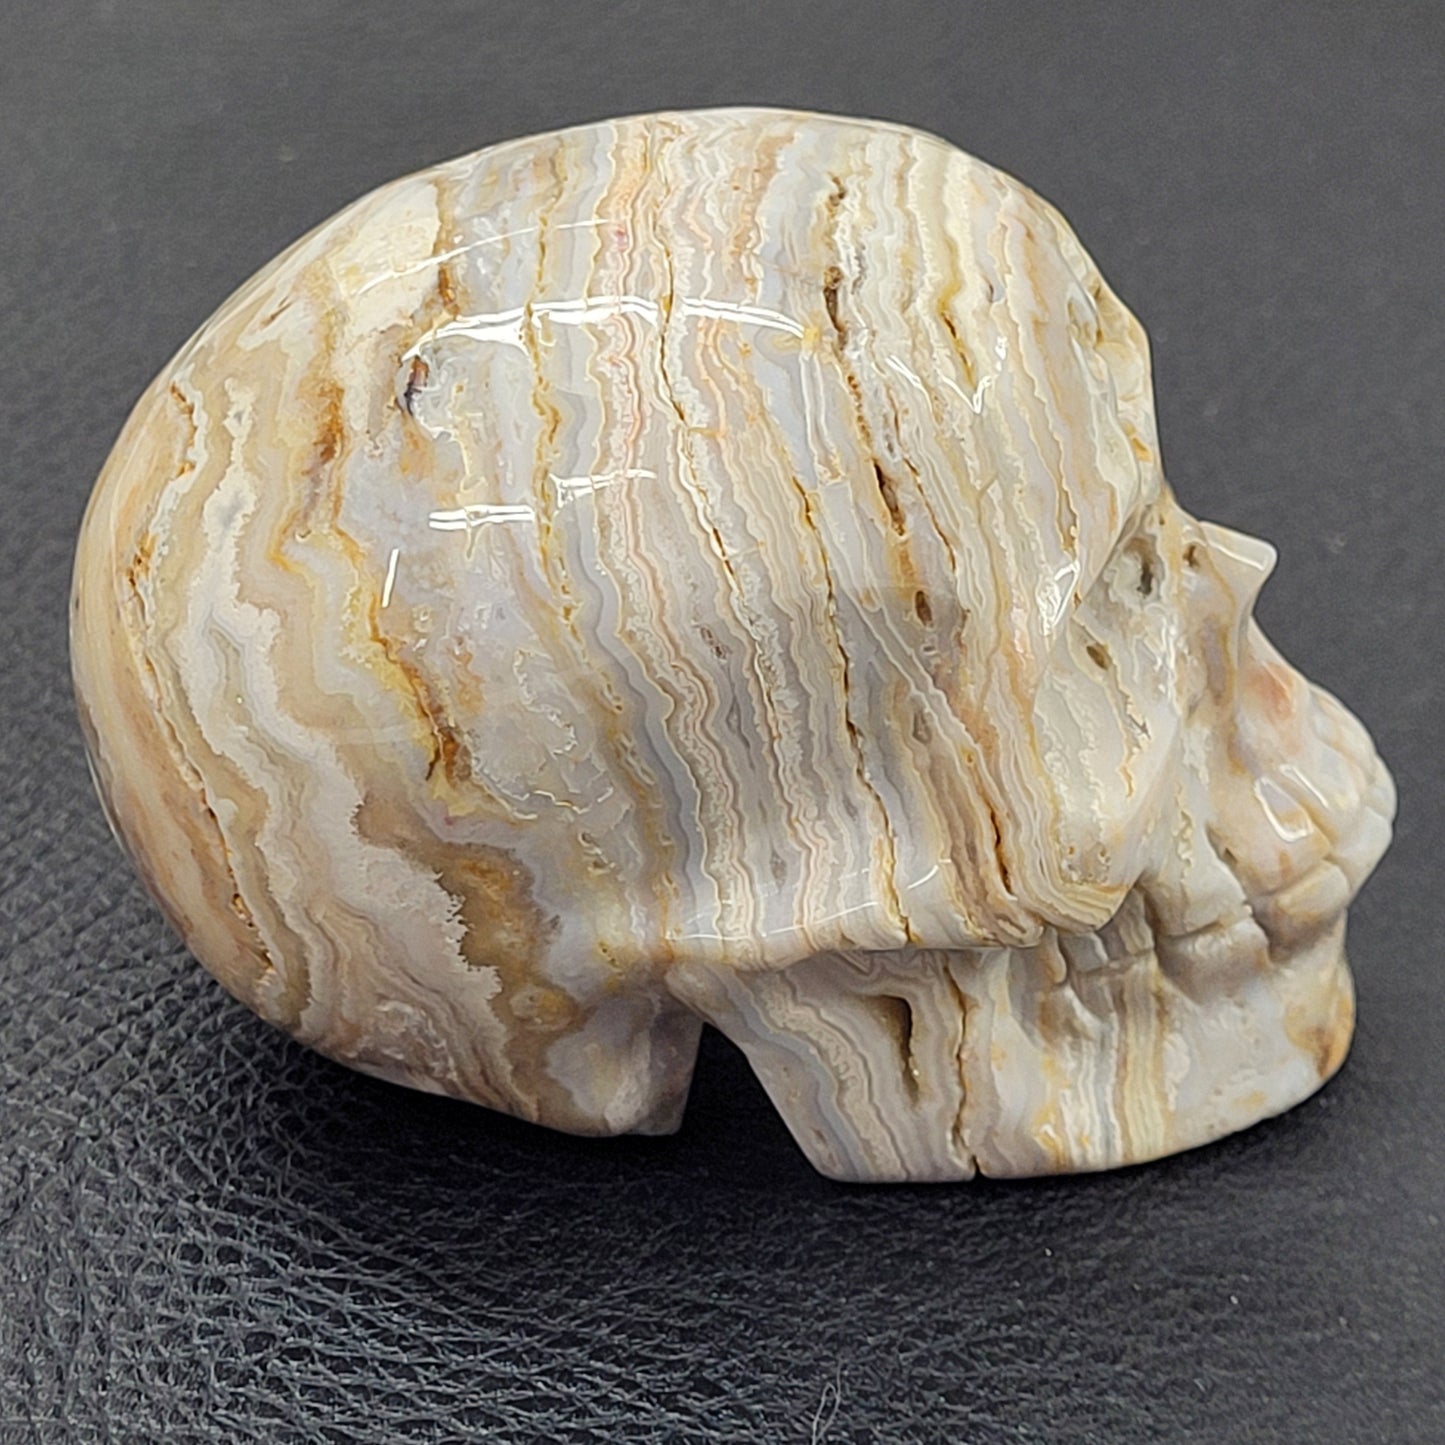 Crazy Lace Agate skull